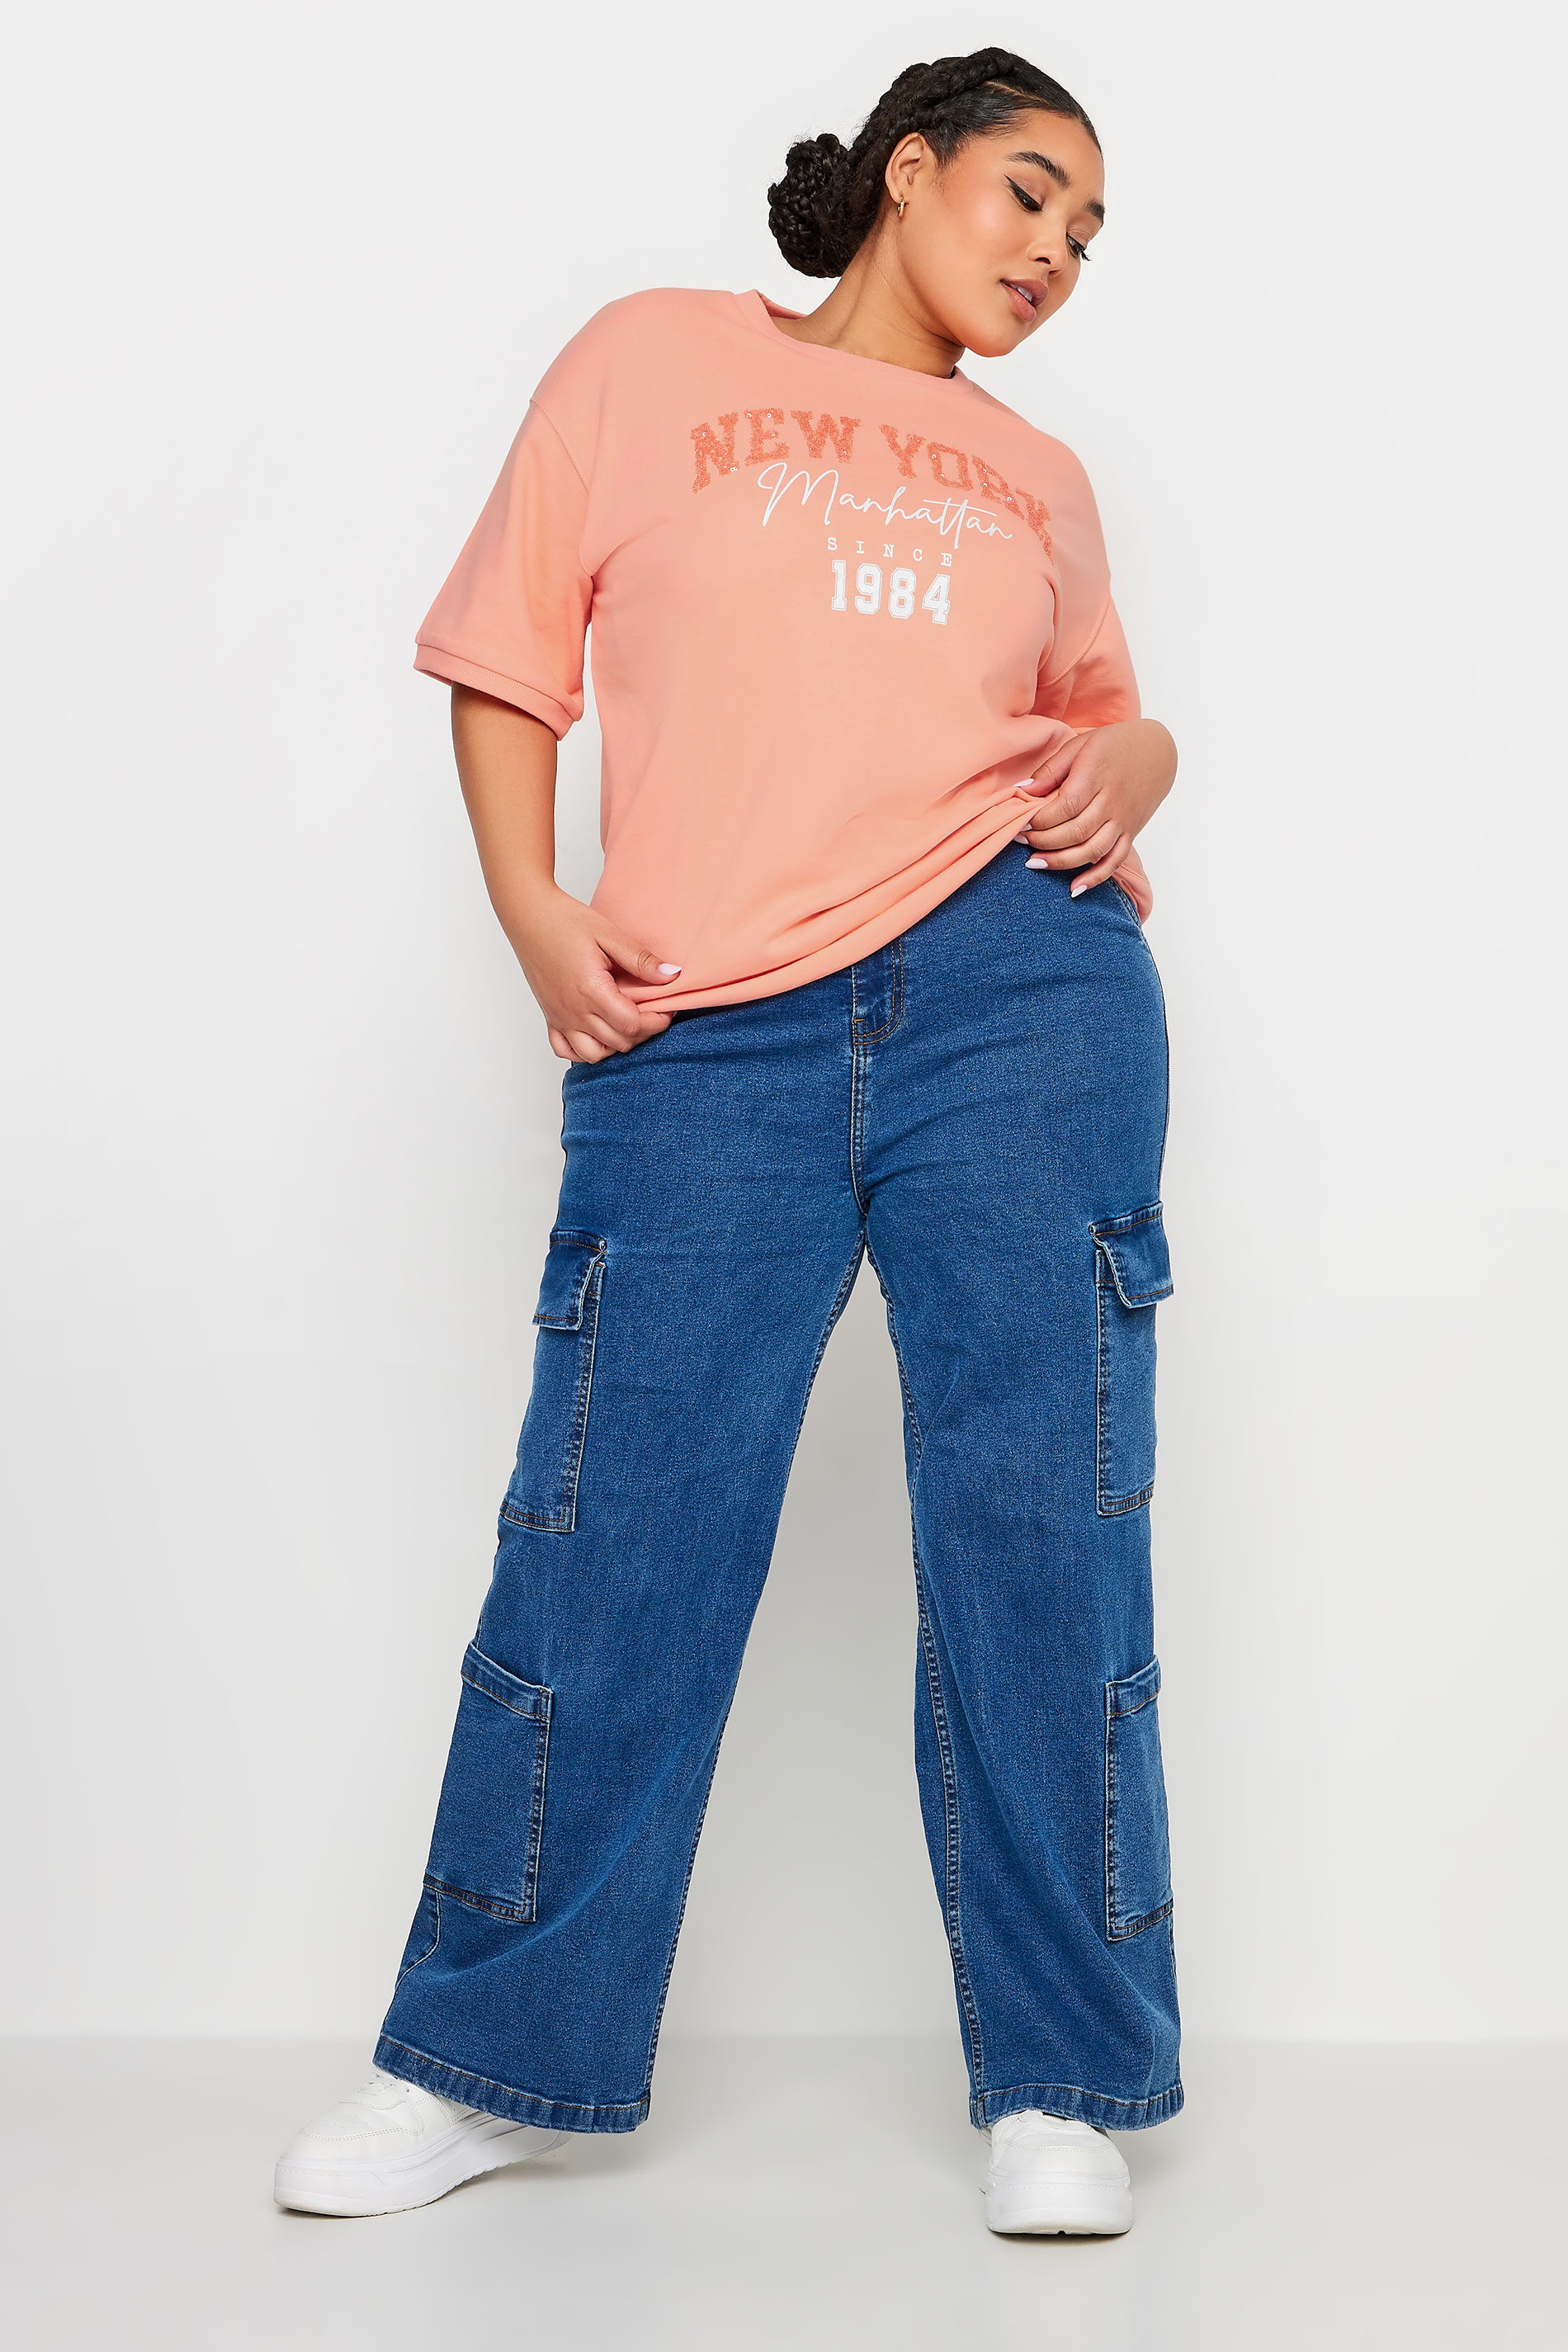 YOURS Plus Size Pink 'New York' Slogan Embellished Top | Yours Clothing 2